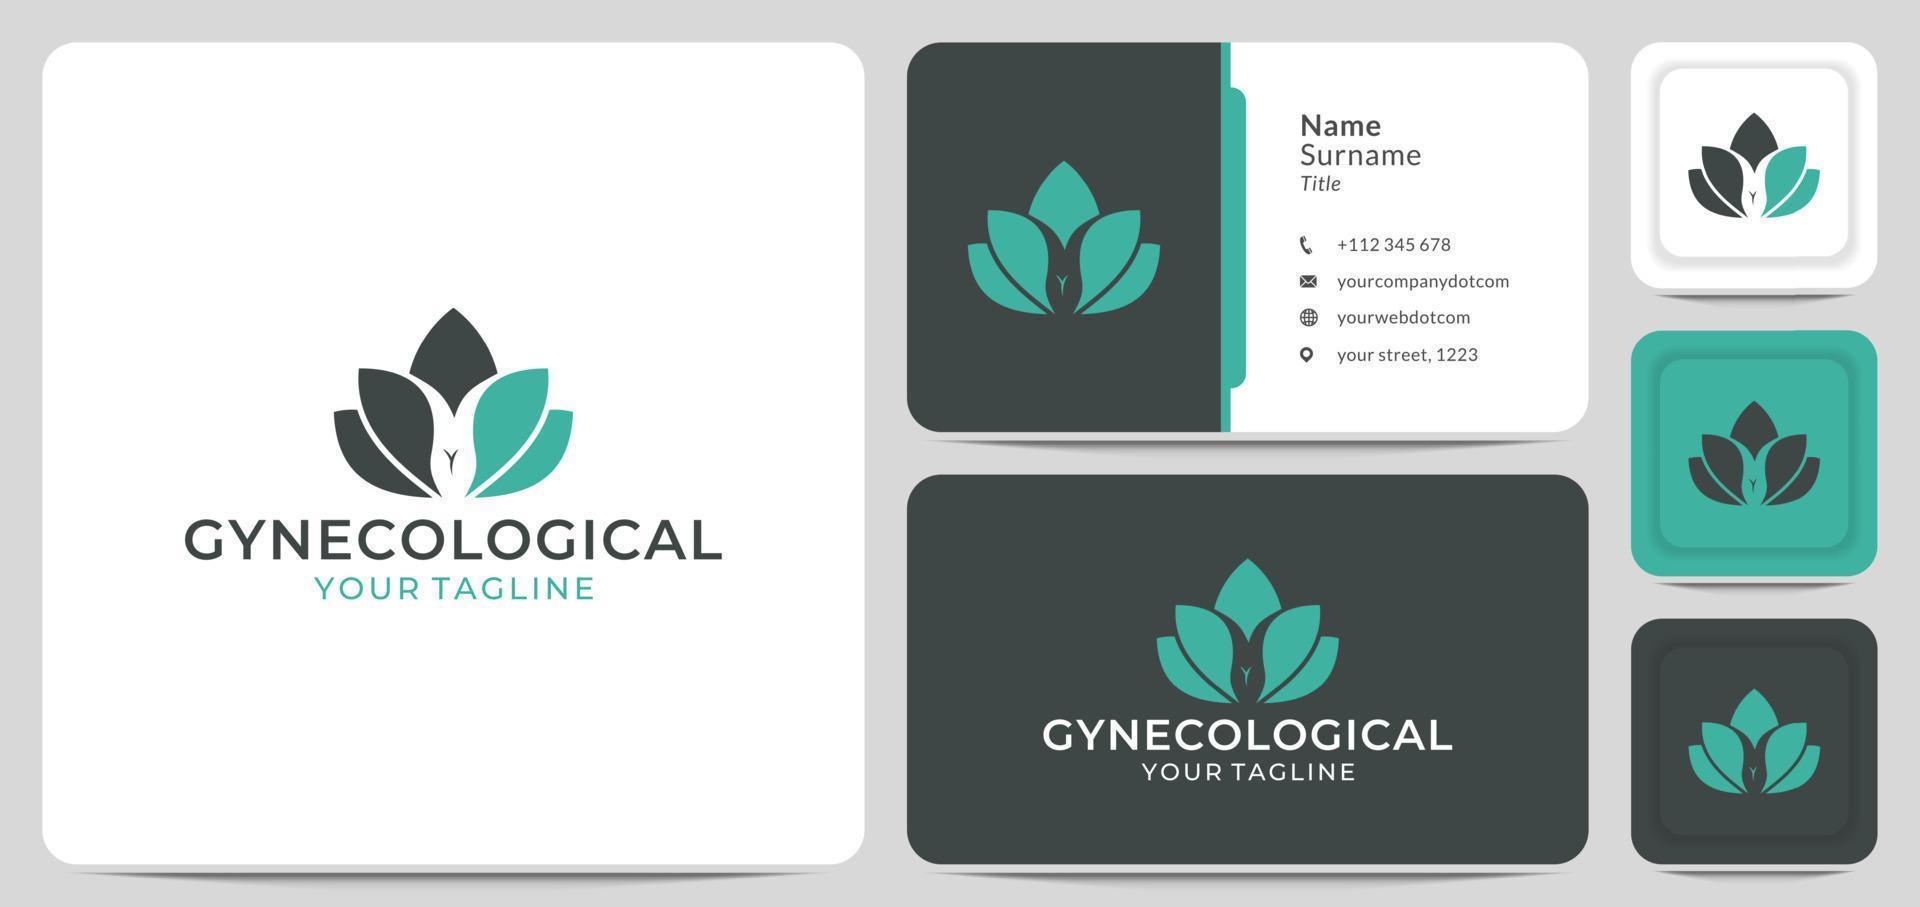 logo gynecological with leaf, female reproductive, cancer, lotus, health, expert doctor. for medical surgery vector